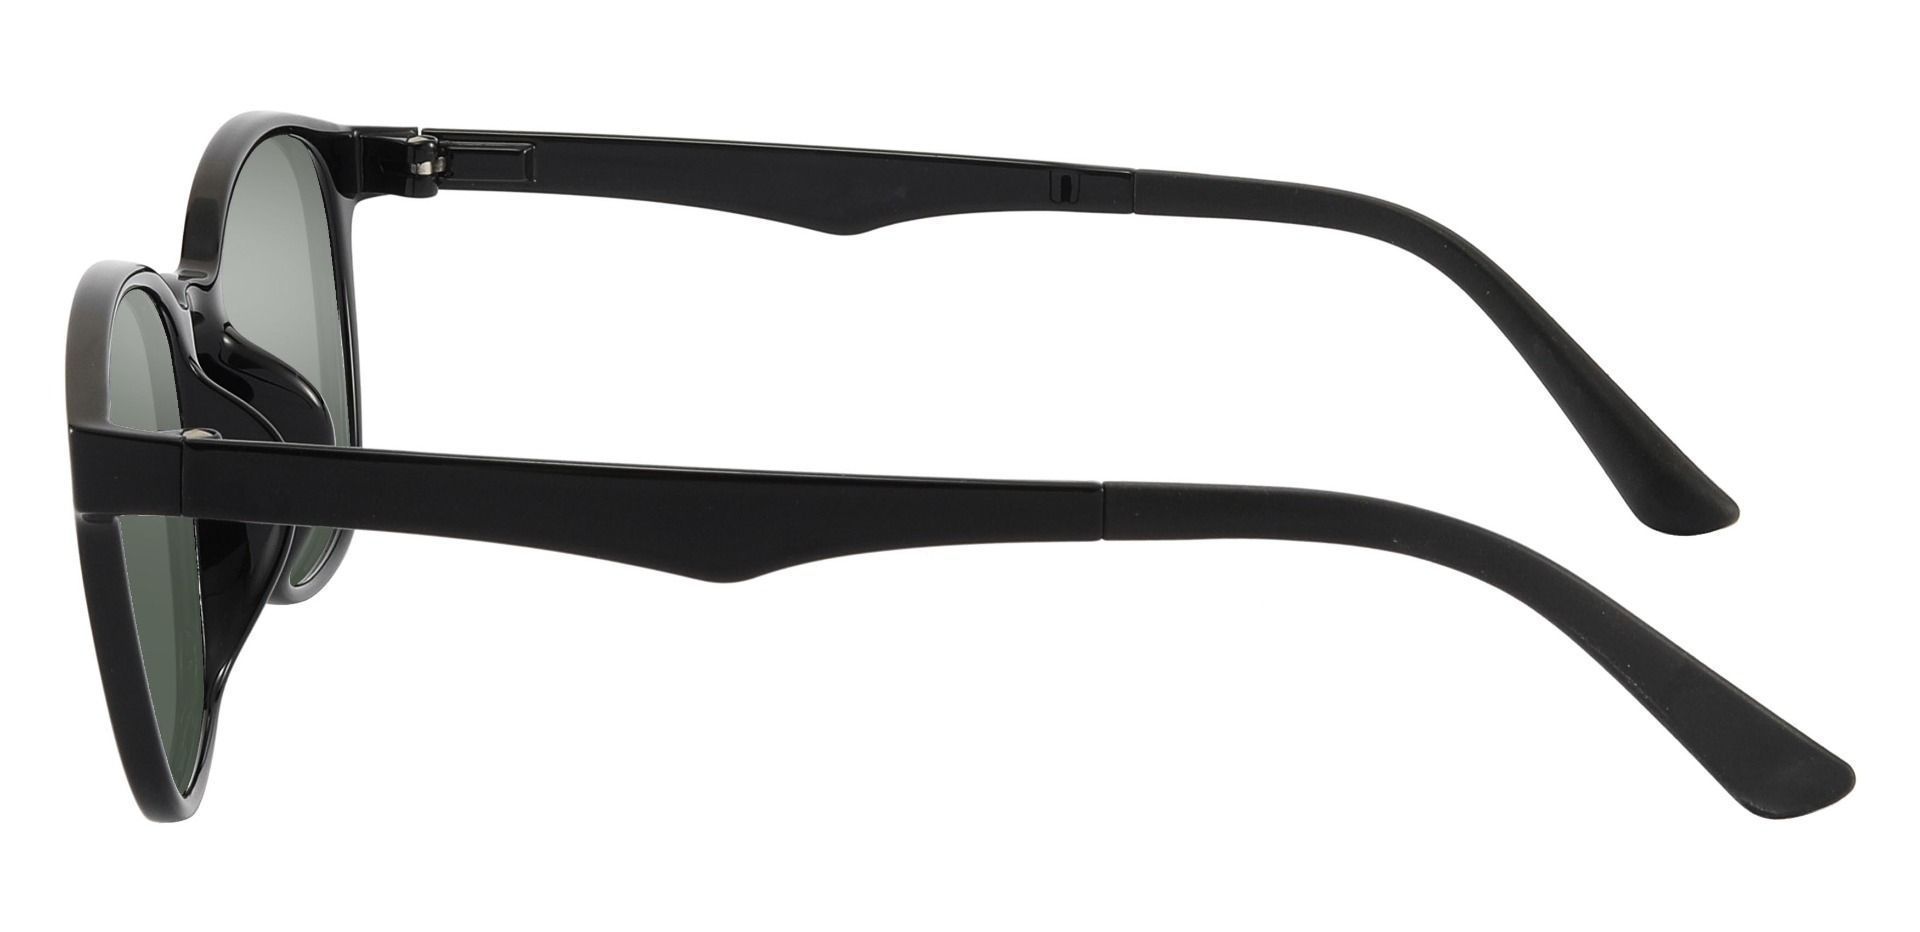 Ursula Oval Reading Sunglasses - Black Frame With Green Lenses